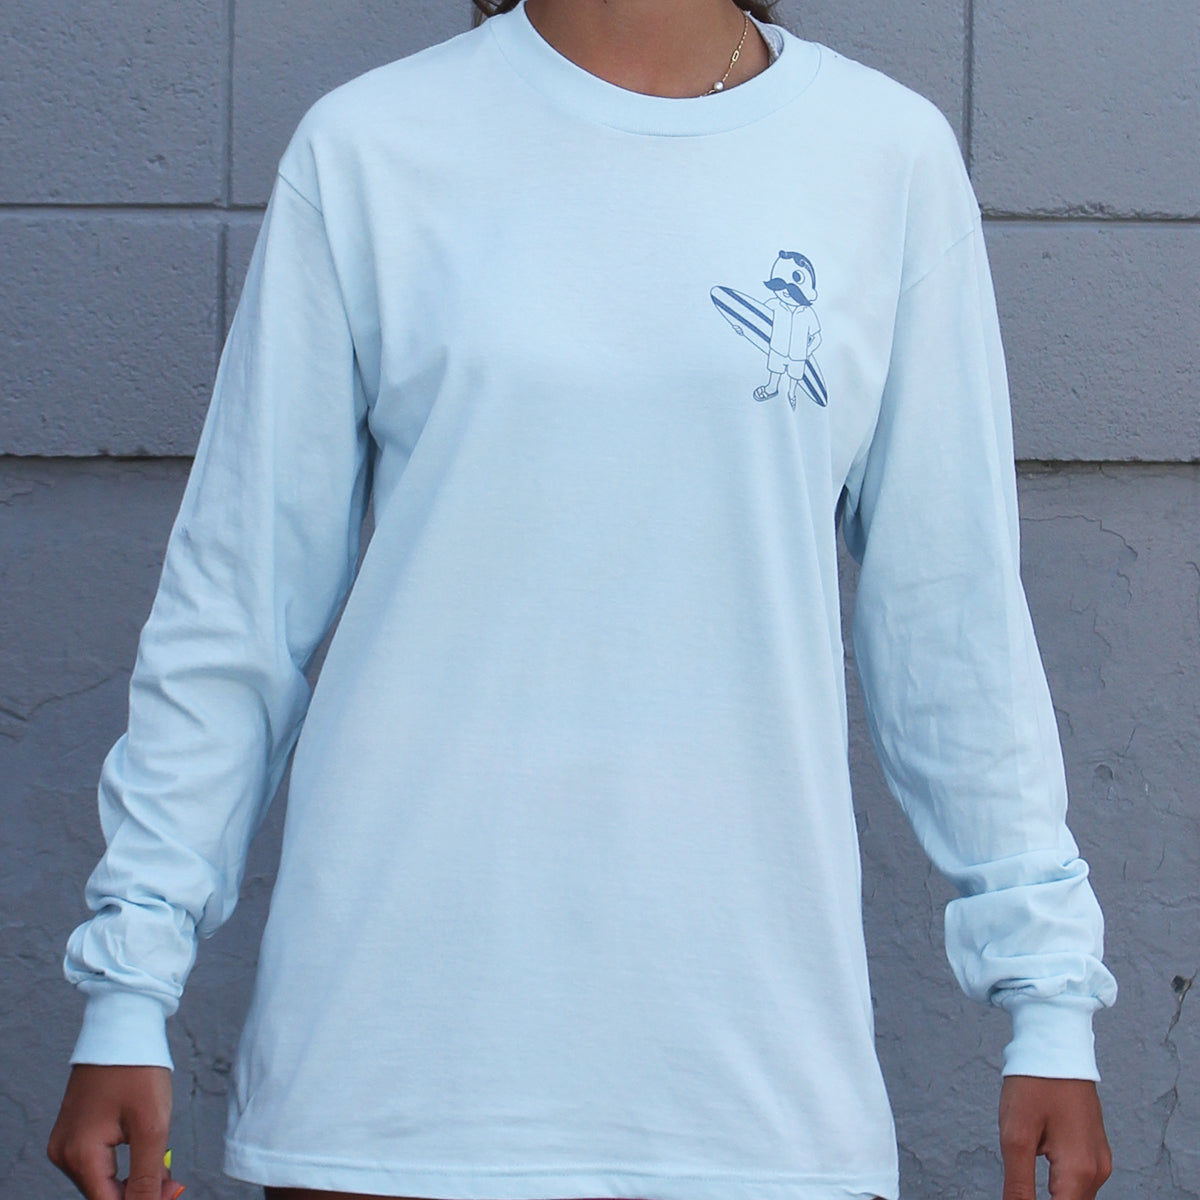 Retro Boh Wave Surfing (Chambray) / Long Sleeve Shirt - Route One Apparel